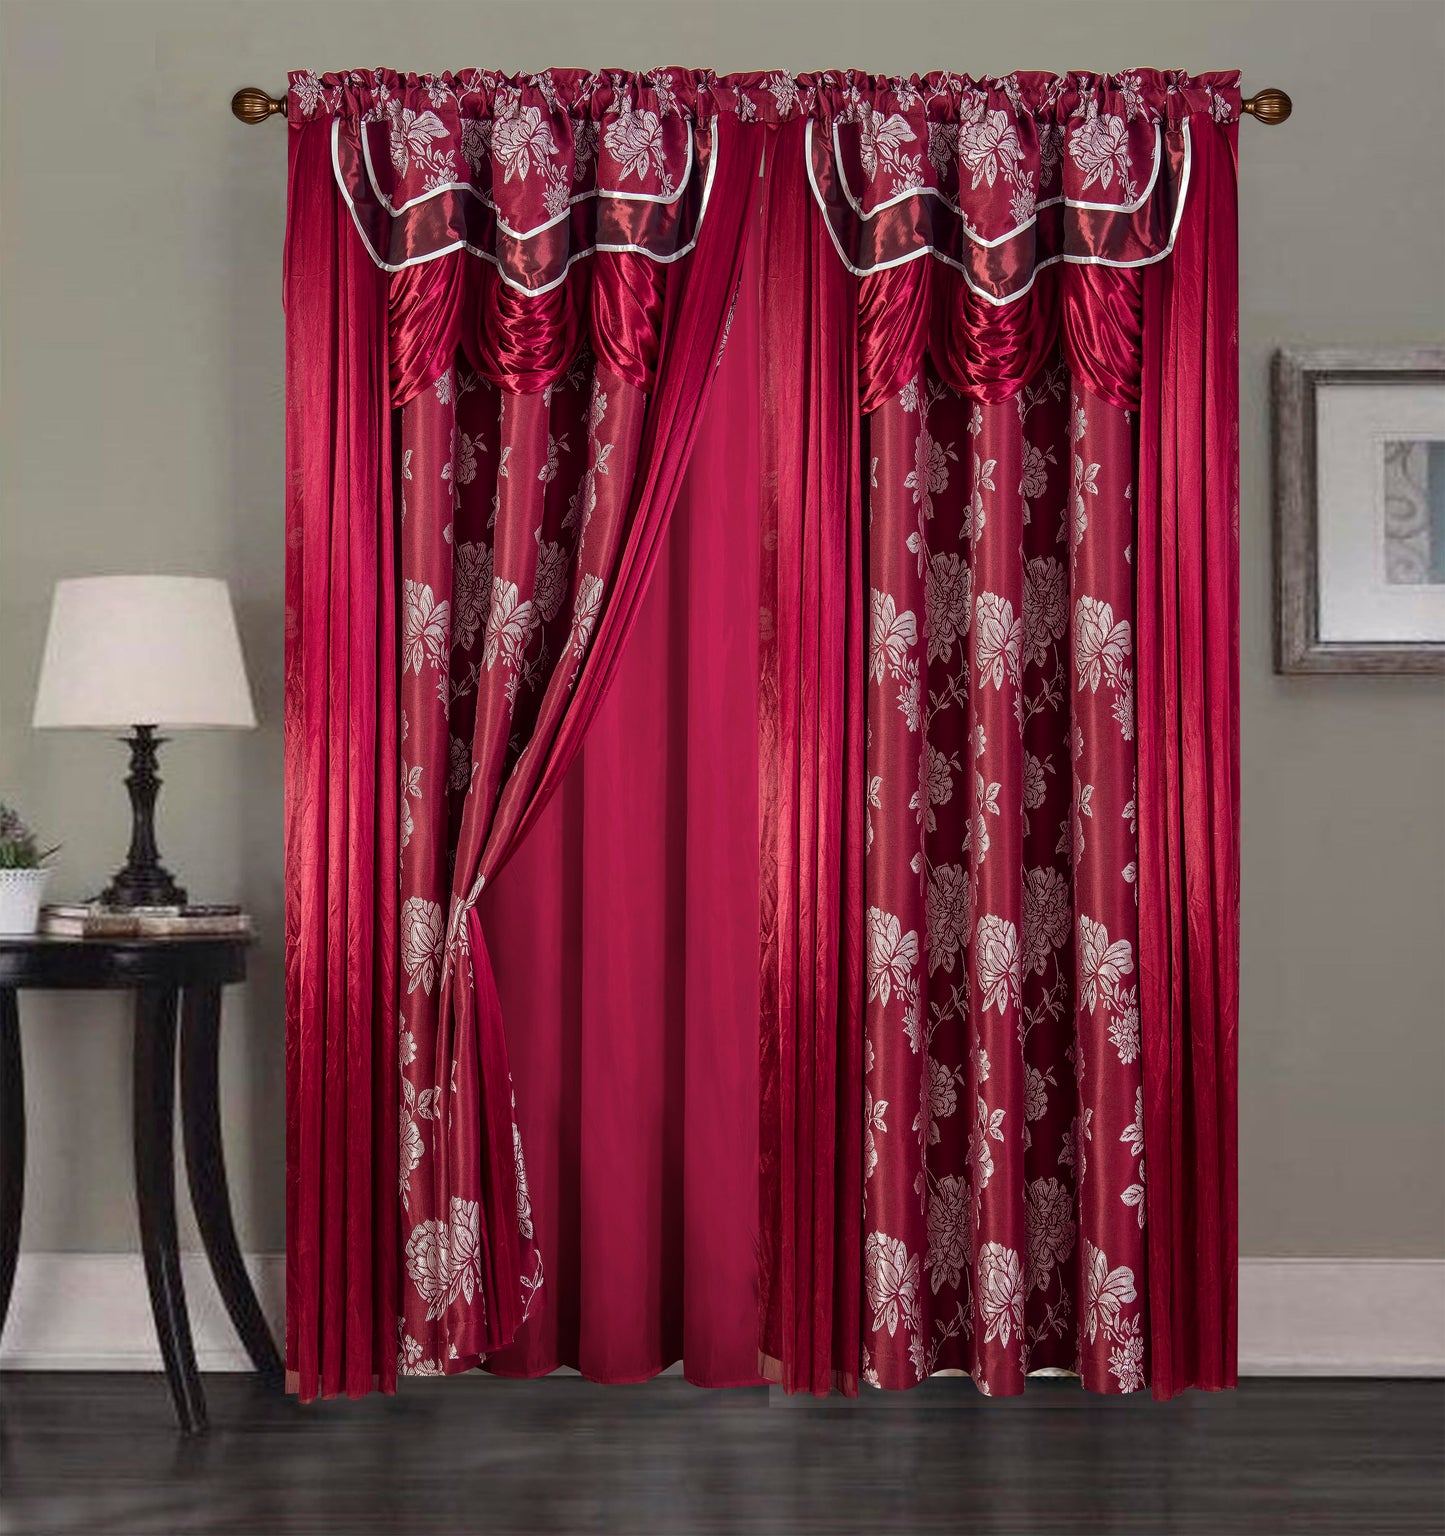 2PC CURTAIN SET W/ ATTACHED VALANCE & BACKING - Emery